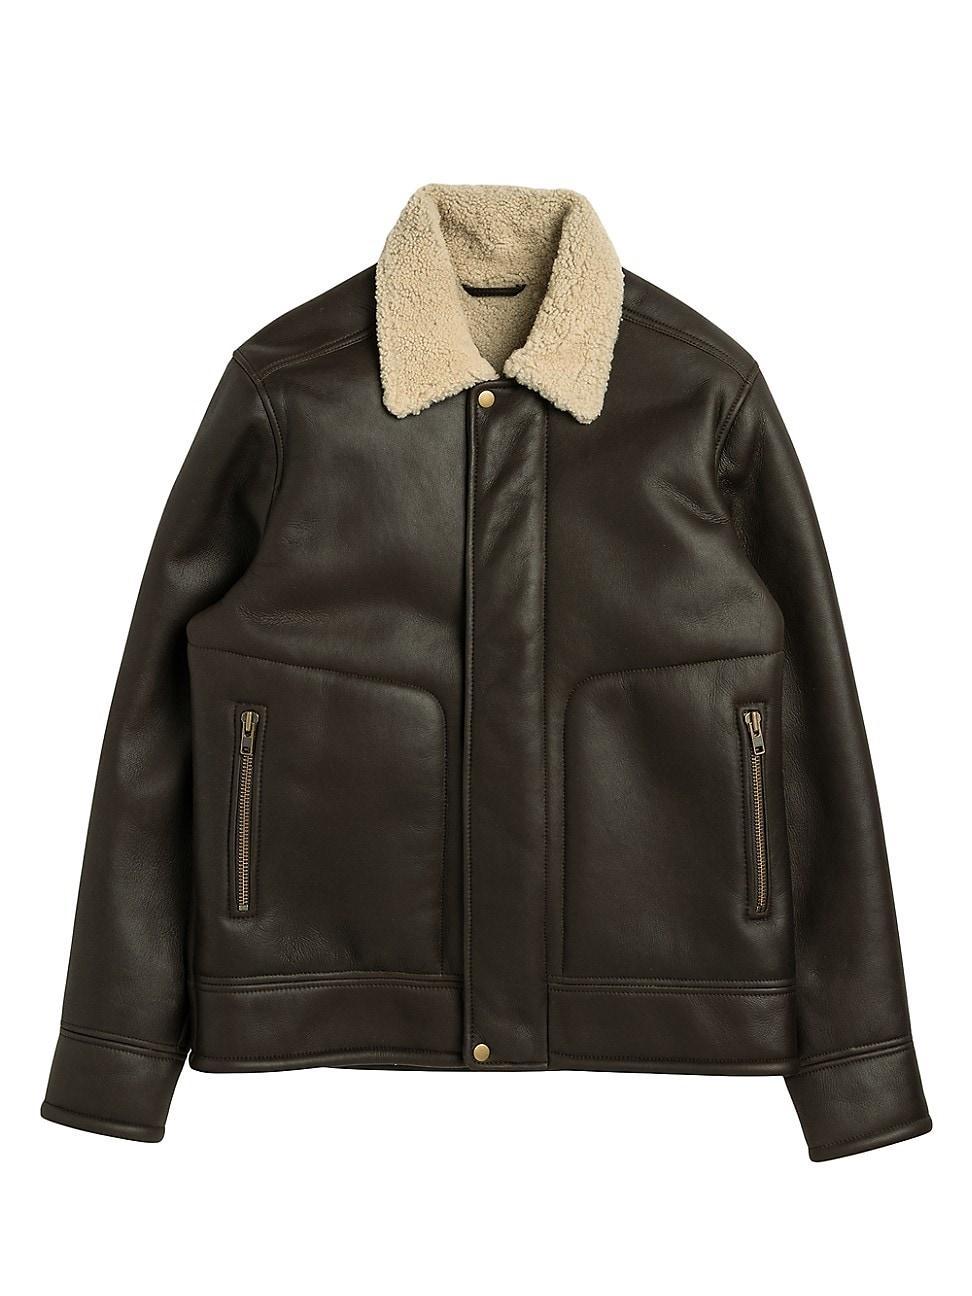 Mens Arrowtown Shearling & Leather Jacket Product Image